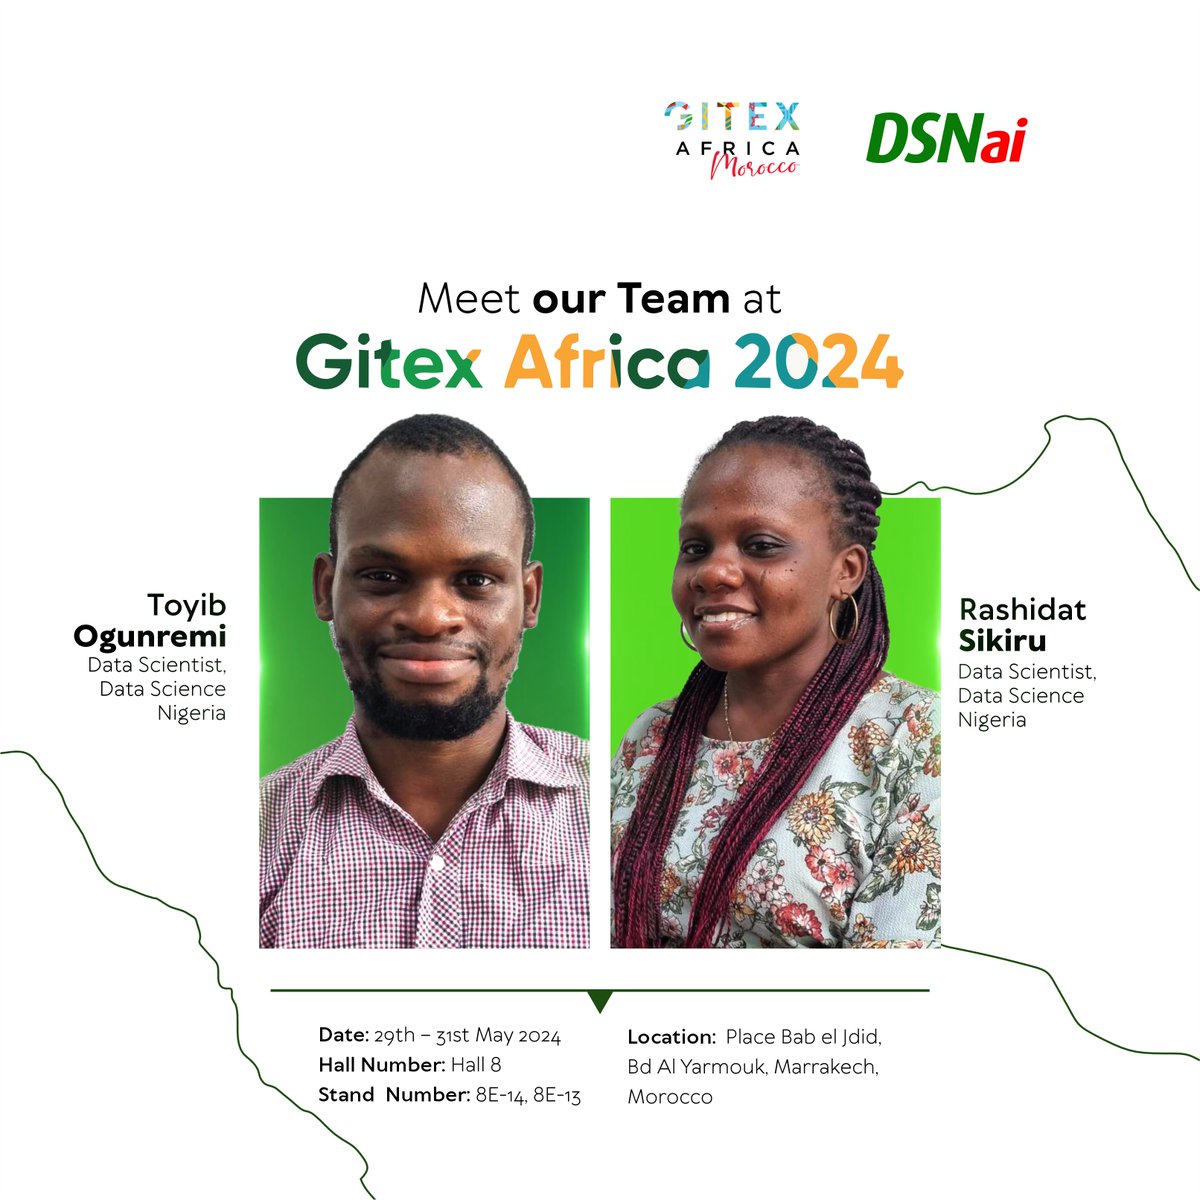 #GITEXAfrica 2024 is just 7 days to go! Meet our 7-person team in Marrakesh, Morocco from May 29-31 to learn more about our Afrocentric LLM solutions that addresses African challenges. Find us at Hall 8, Stand 8E-14, 8E-13. See you there!